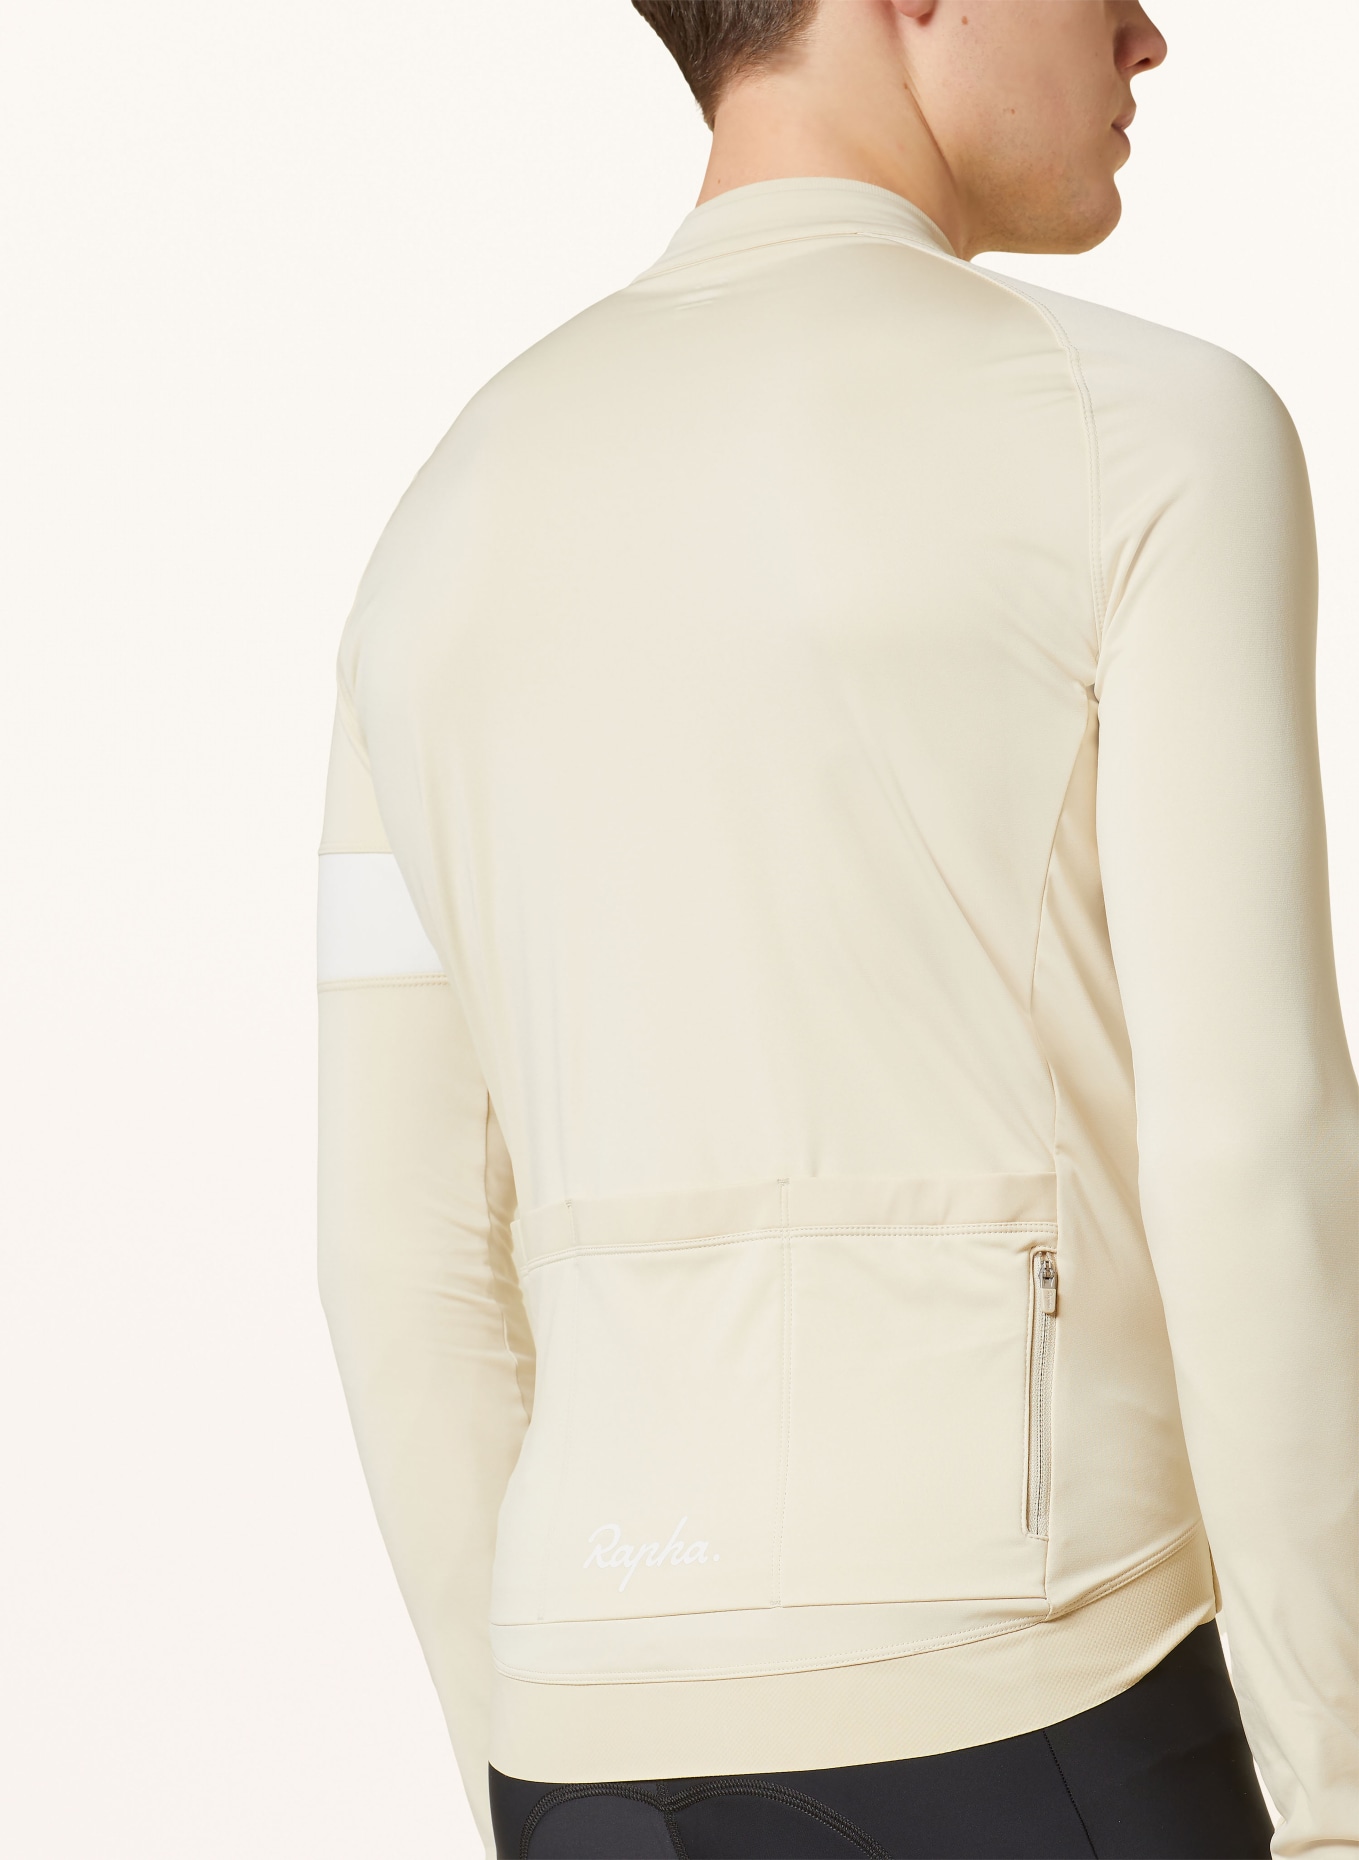 Rapha Cycling jersey CORE, Color: CREAM (Image 5)